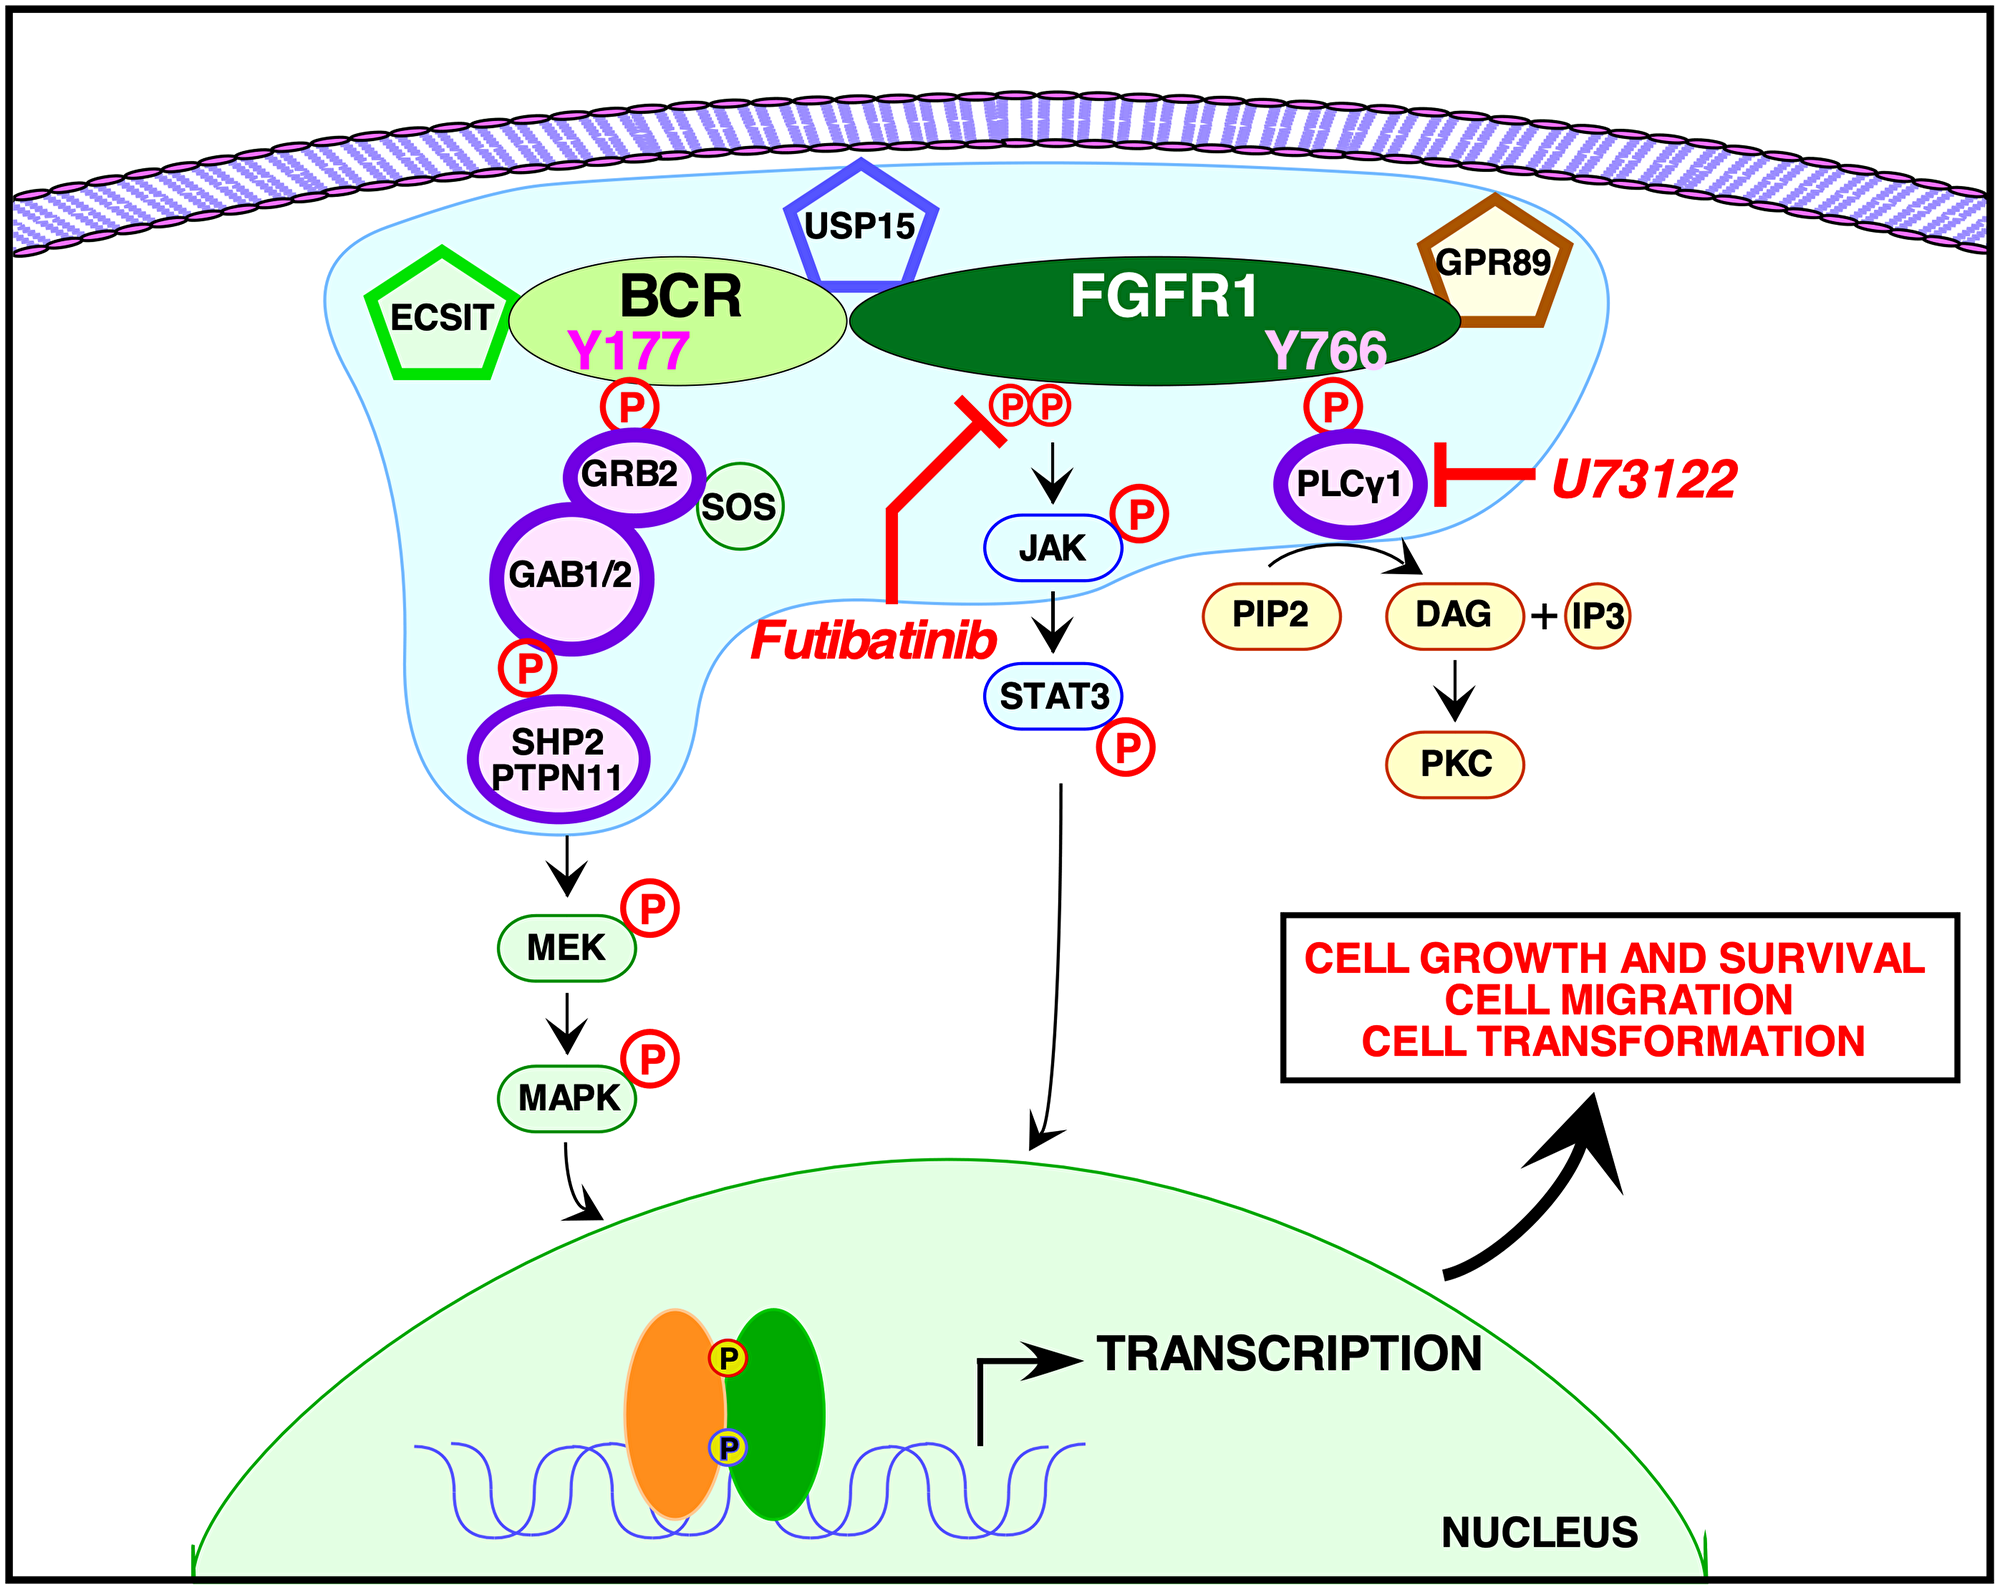 Signaling pathways activated by BCR-FGFR1.